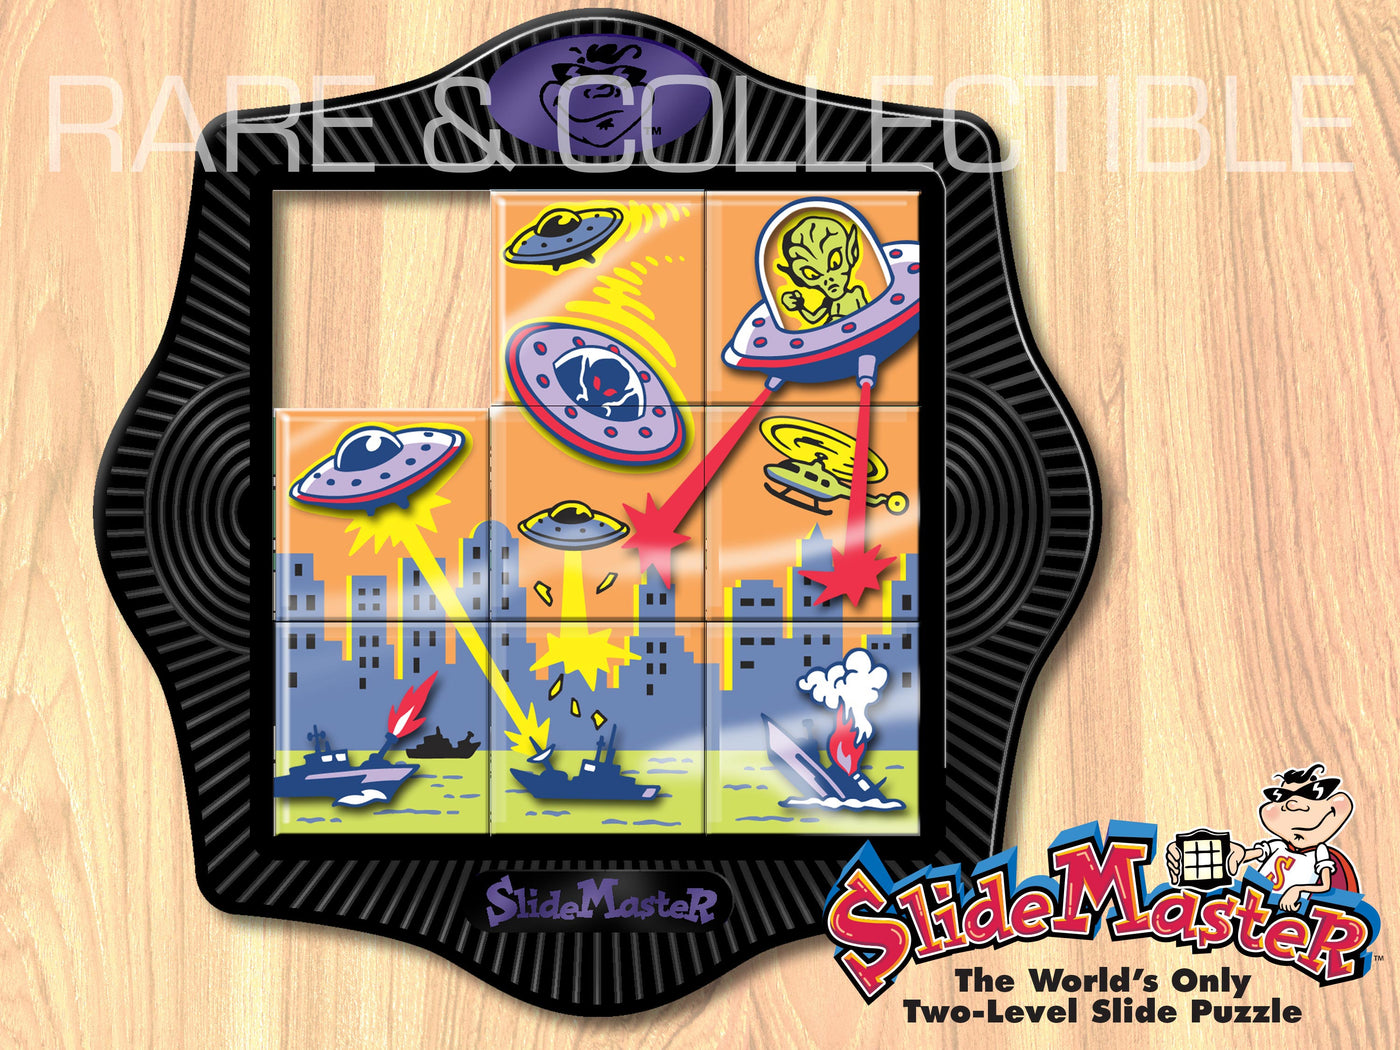 Rare and Collectable Slide Puzzle - "SlideMaster - Aliens" - by Dan Gilbert